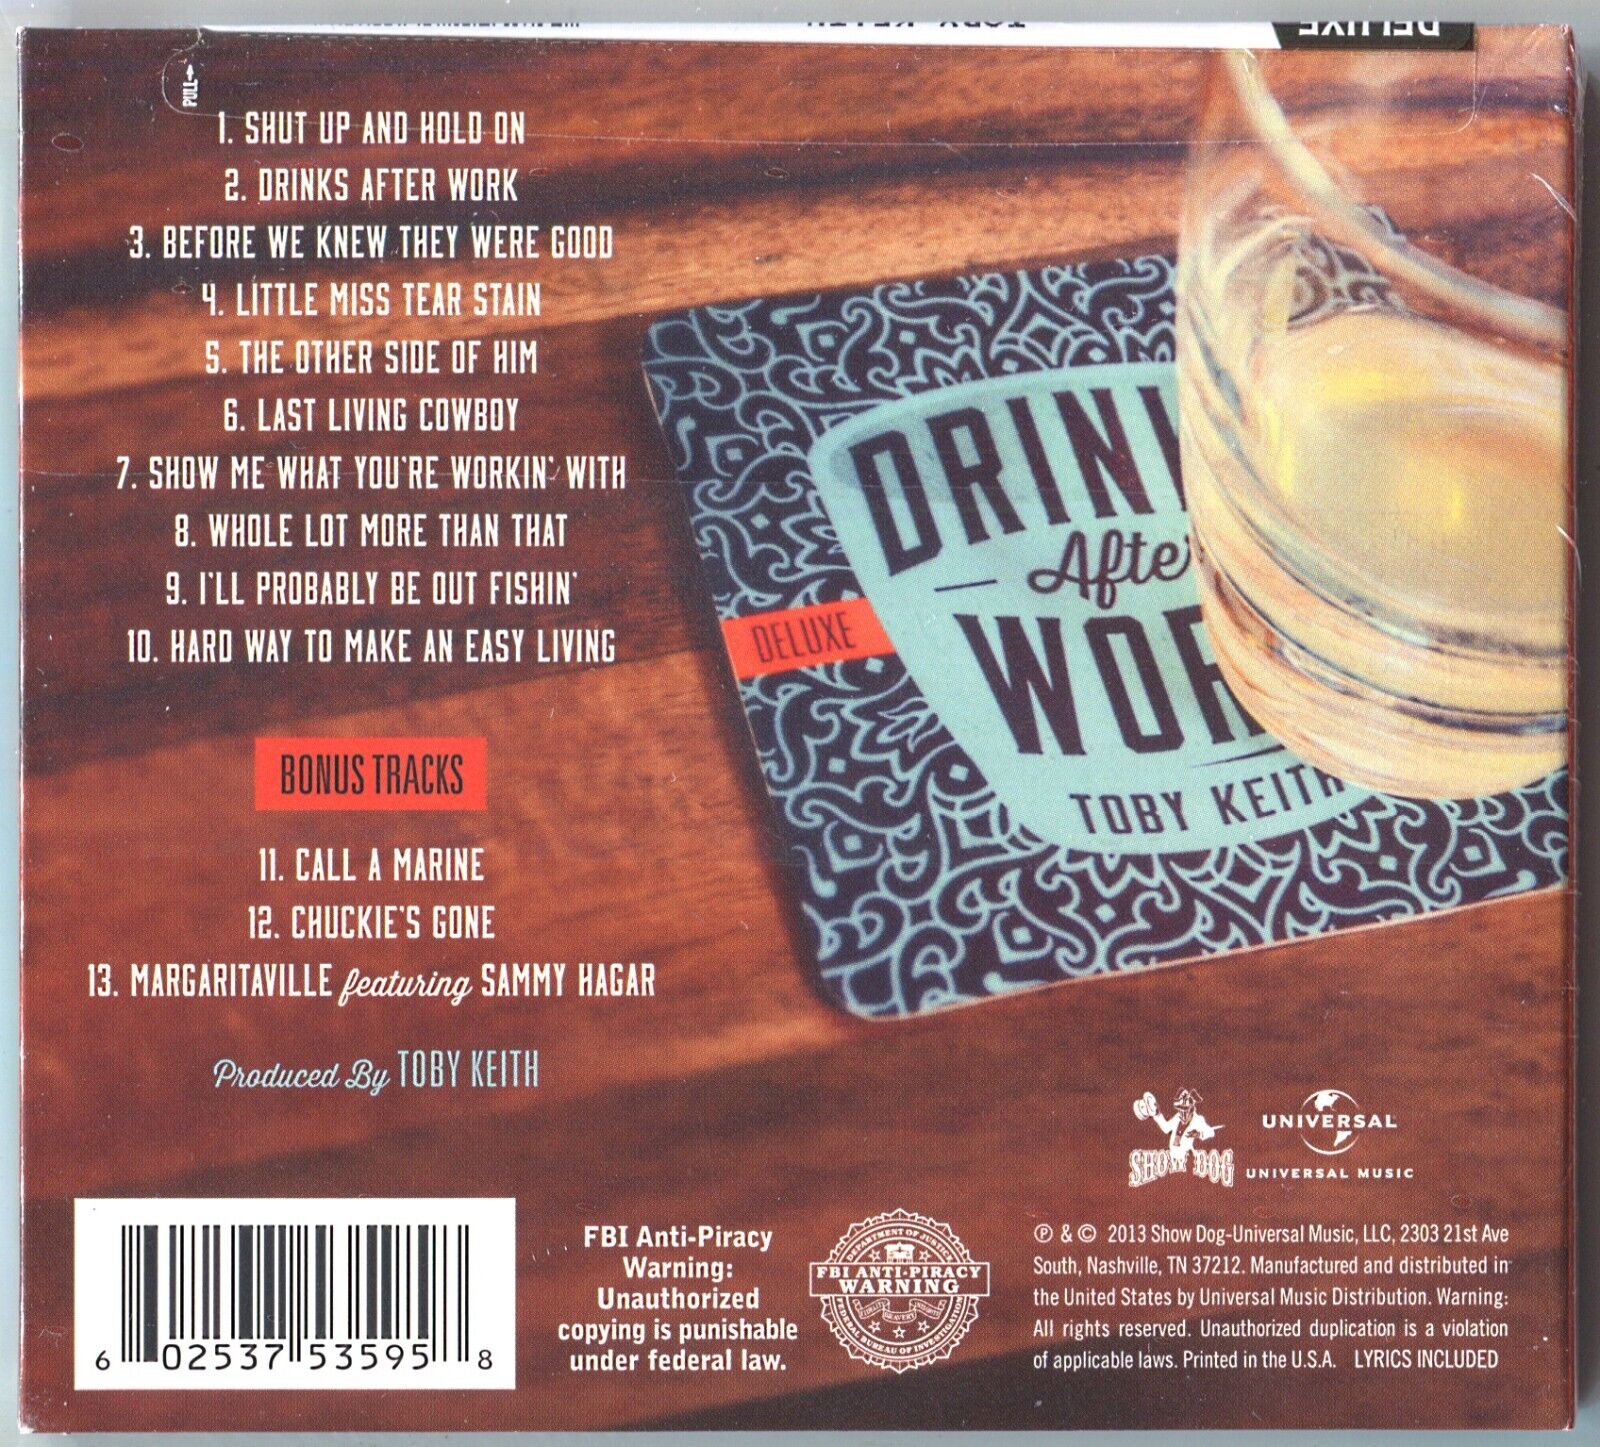 Drinks After Work by Toby Keith (CD, 2013) for sale online | eBay